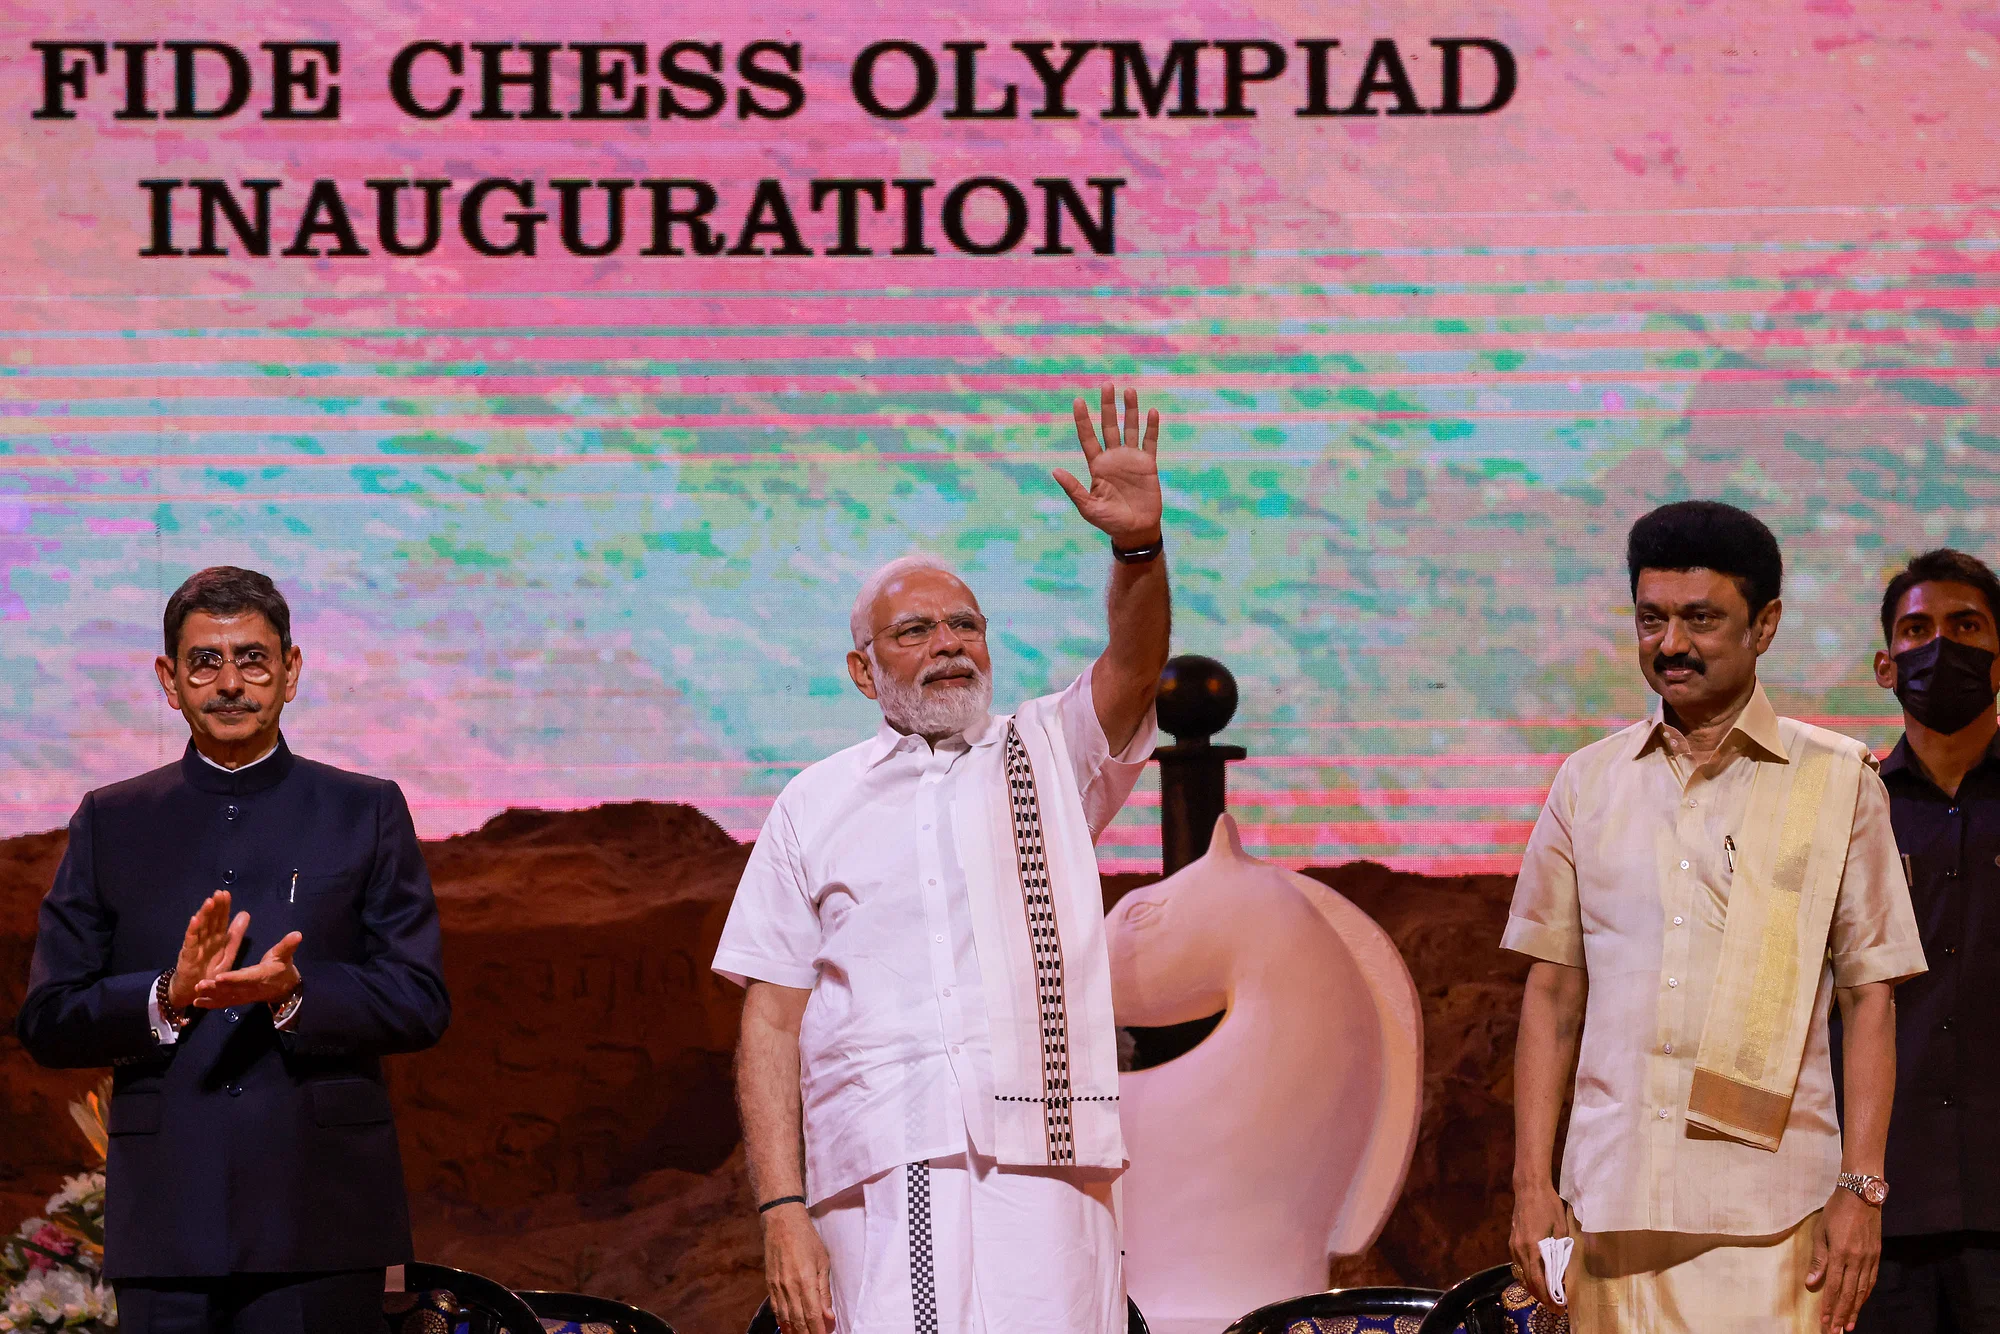 44 chess Olympiad India won the first match